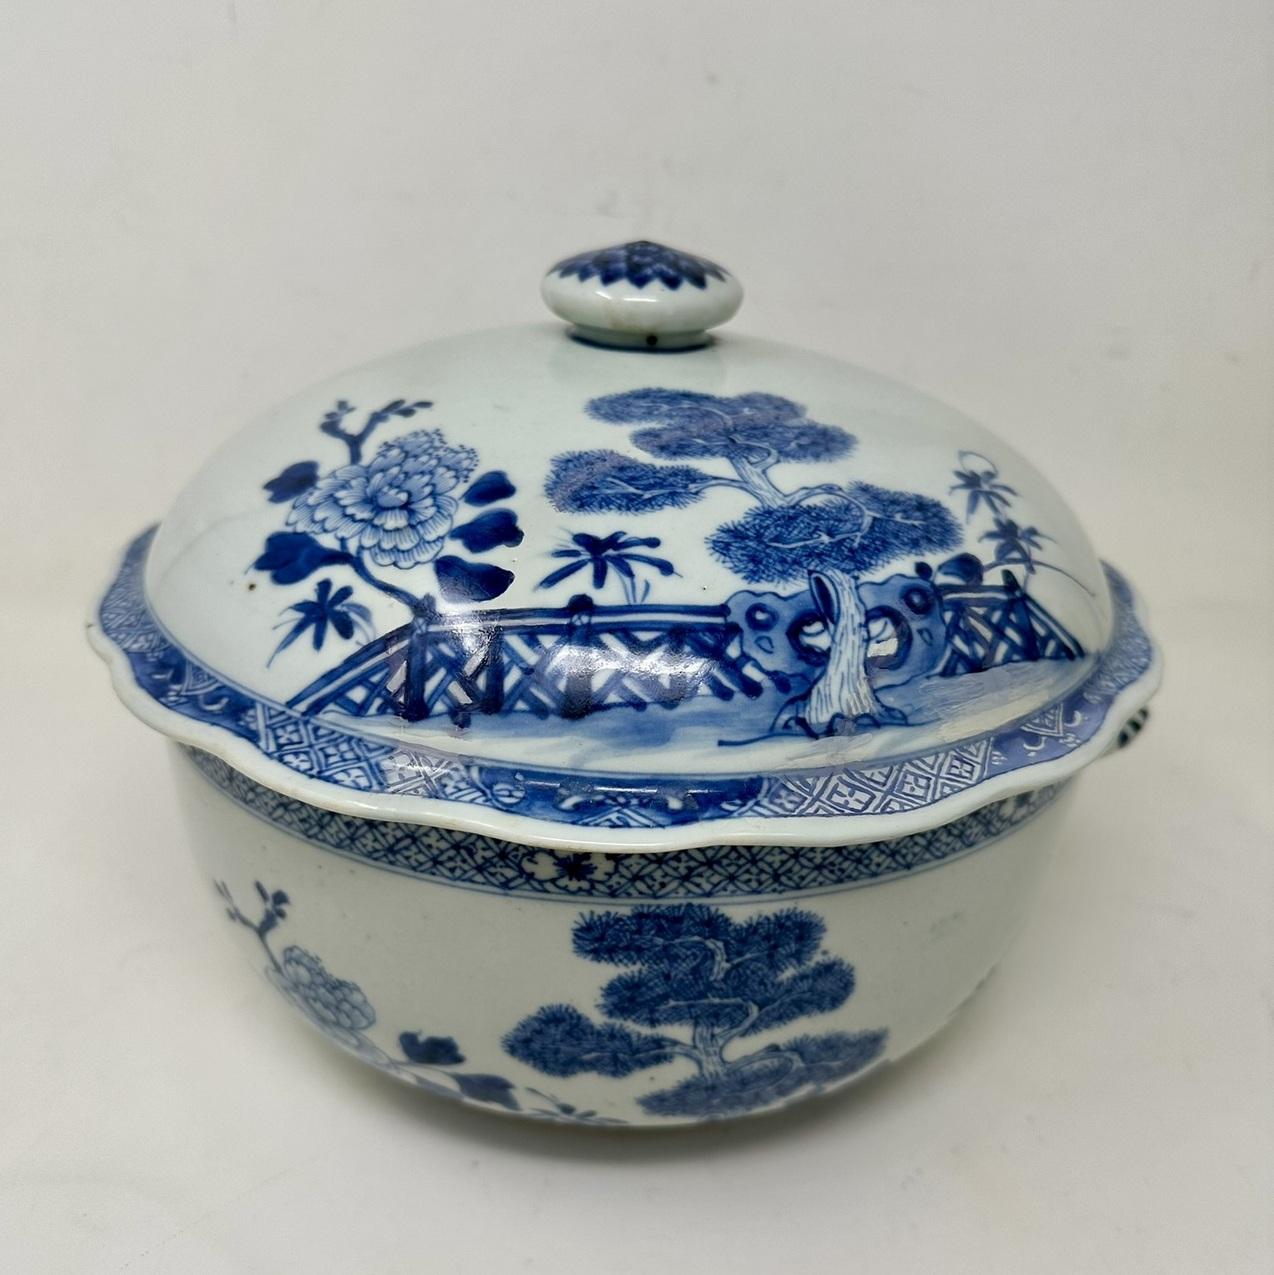 A Very Fine & Rare Example of an Eighteenth-Century Chinese Porcelain Export Circular Lidded twin handle blue and white Deep Dish Tureen or Centerpiece Bowl of generous proportions and of the period Chien Lung 1736-1795. 

Exquisitely hand decorated